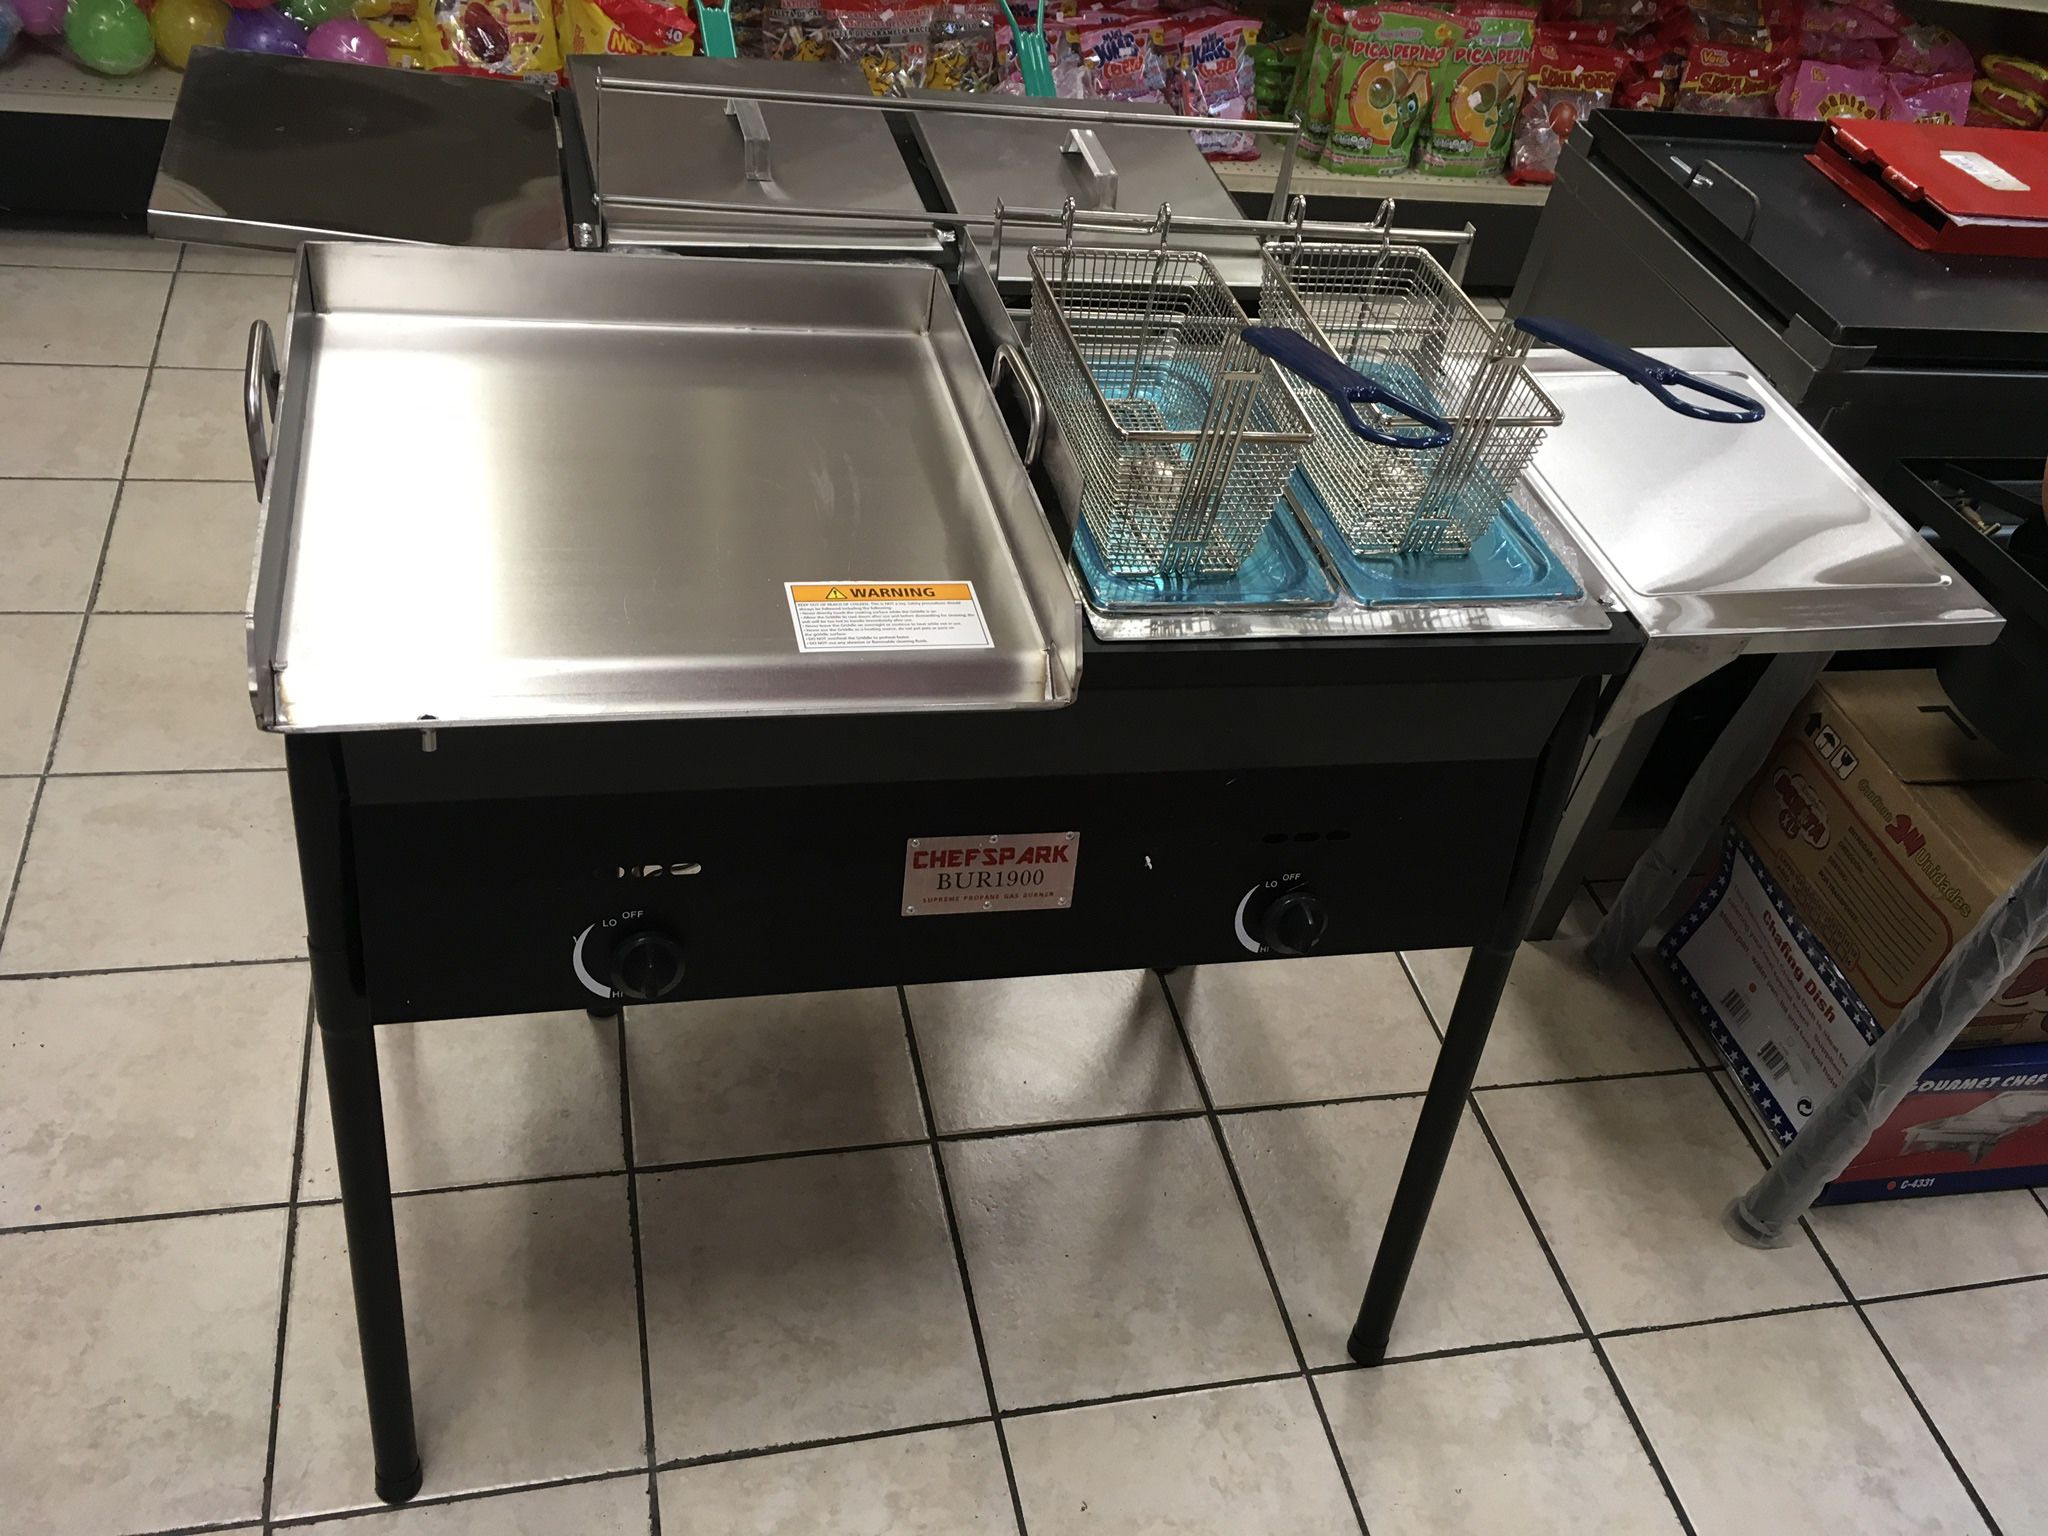 3 In 1 Burner / Grill / Fryer/ Steam Table / Plancha Para Tacos